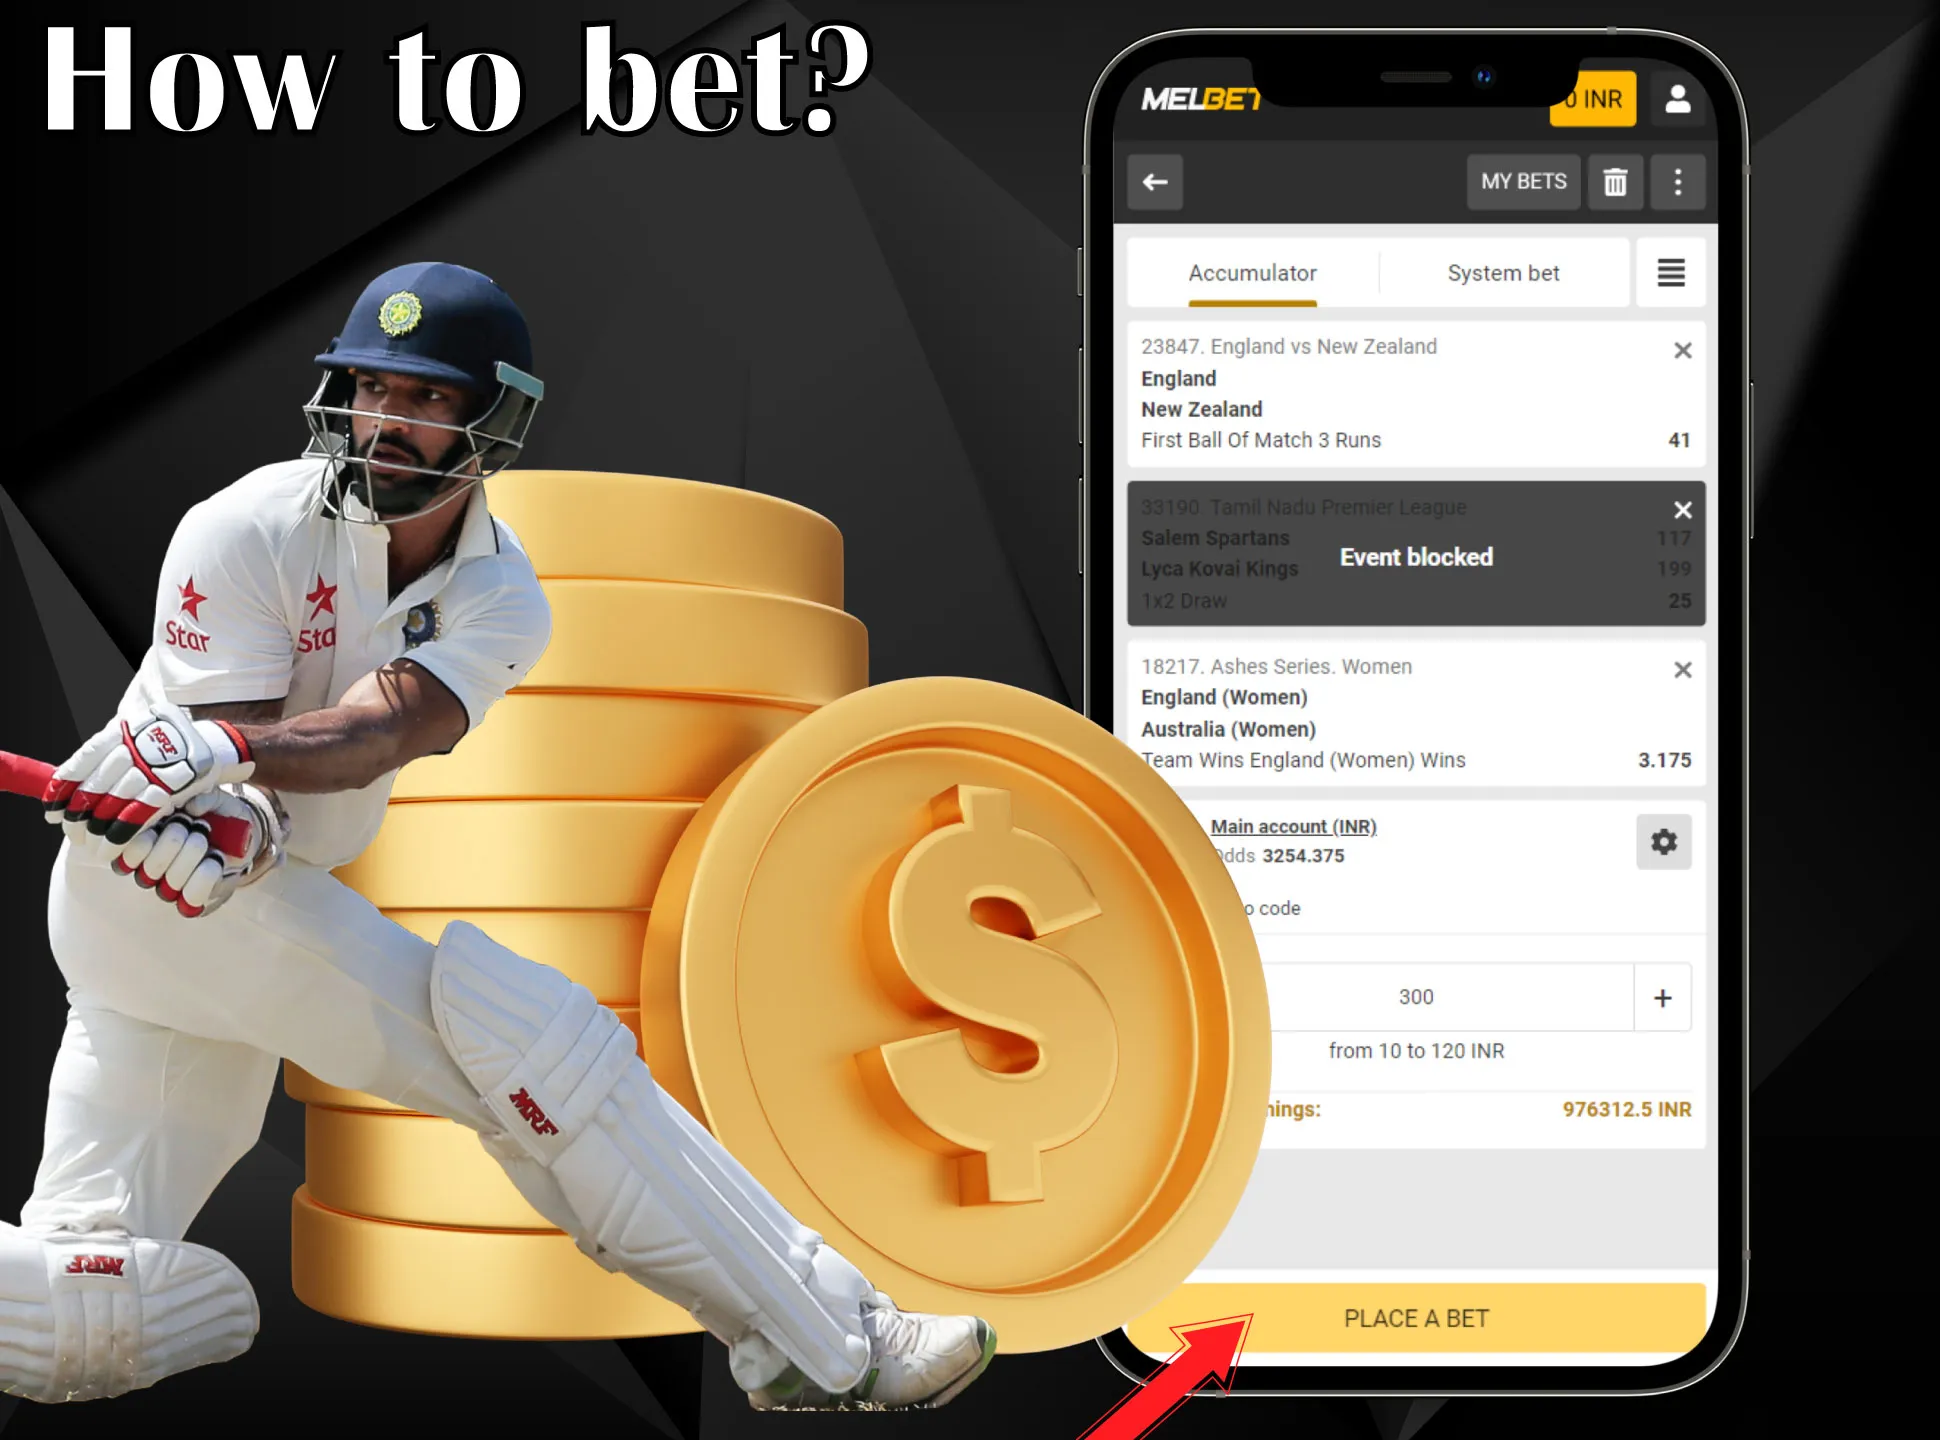 Log in to your account, top it up, choose an event and place a bet.